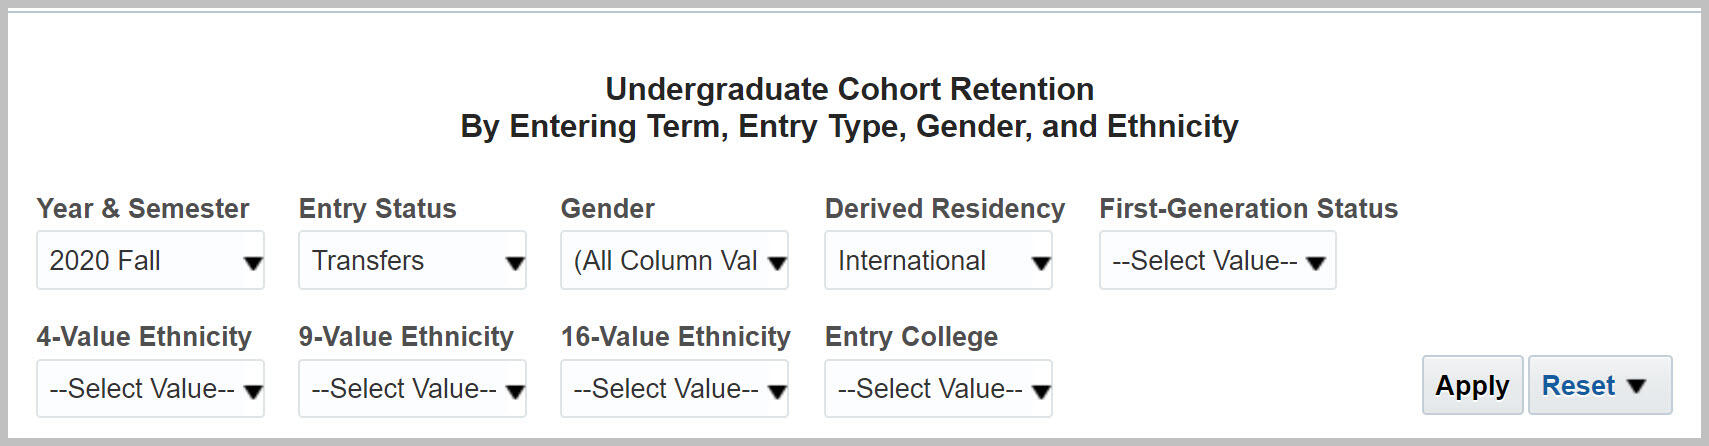 UG Retention prompts with 2020 Fall, Transfers, and International selected